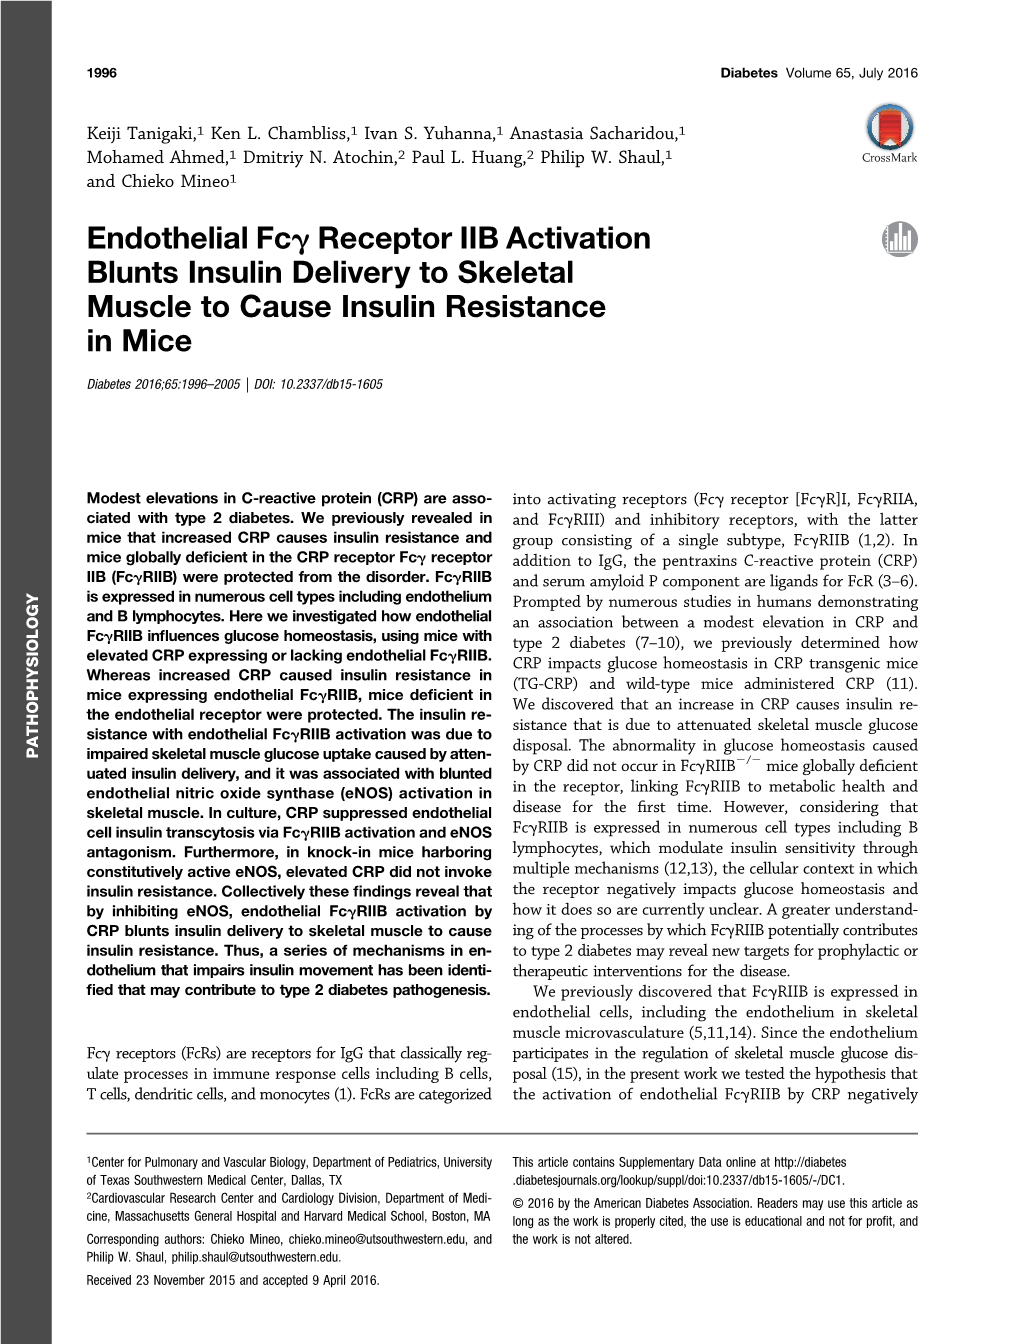 Endothelial Fcγ Receptor IIB Activation Blunts Insulin Delivery To